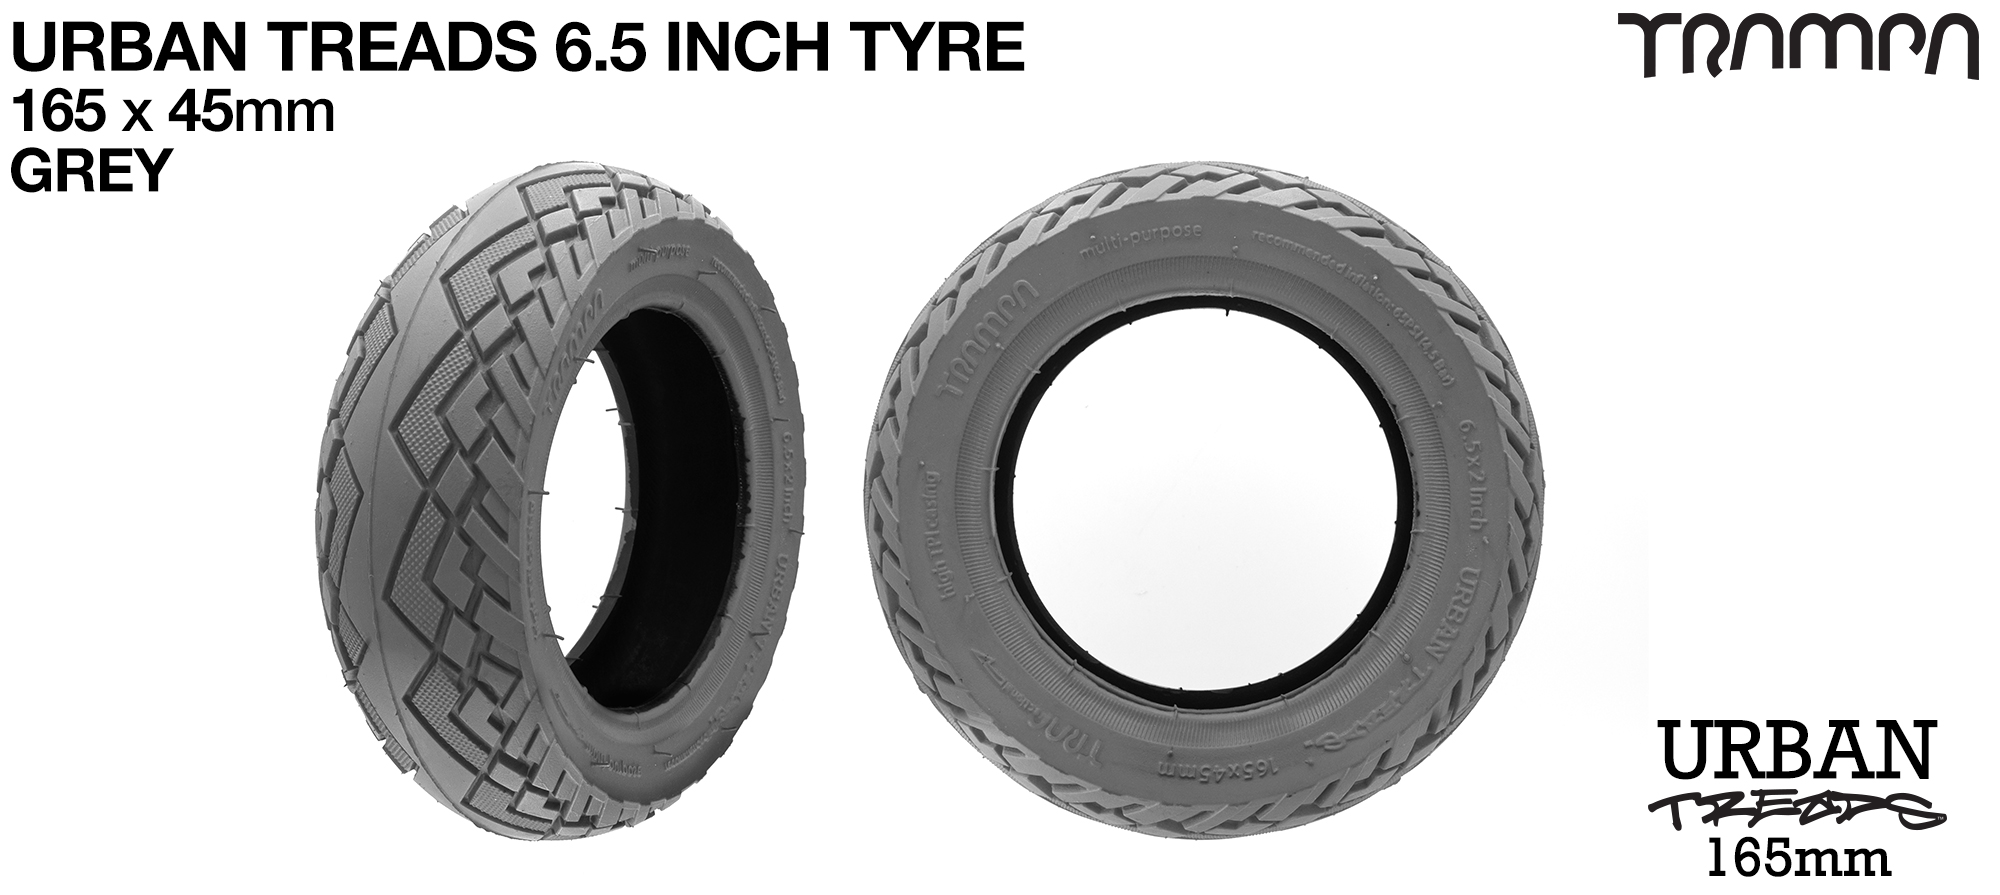 URBAN TREADS 6 Inch Tyre measures 3.75x 1.75x 6.5 Inch or 165x 45mm with 3.75 inch Rim & fits all 3.75 inch Hubs - DARK GREY  